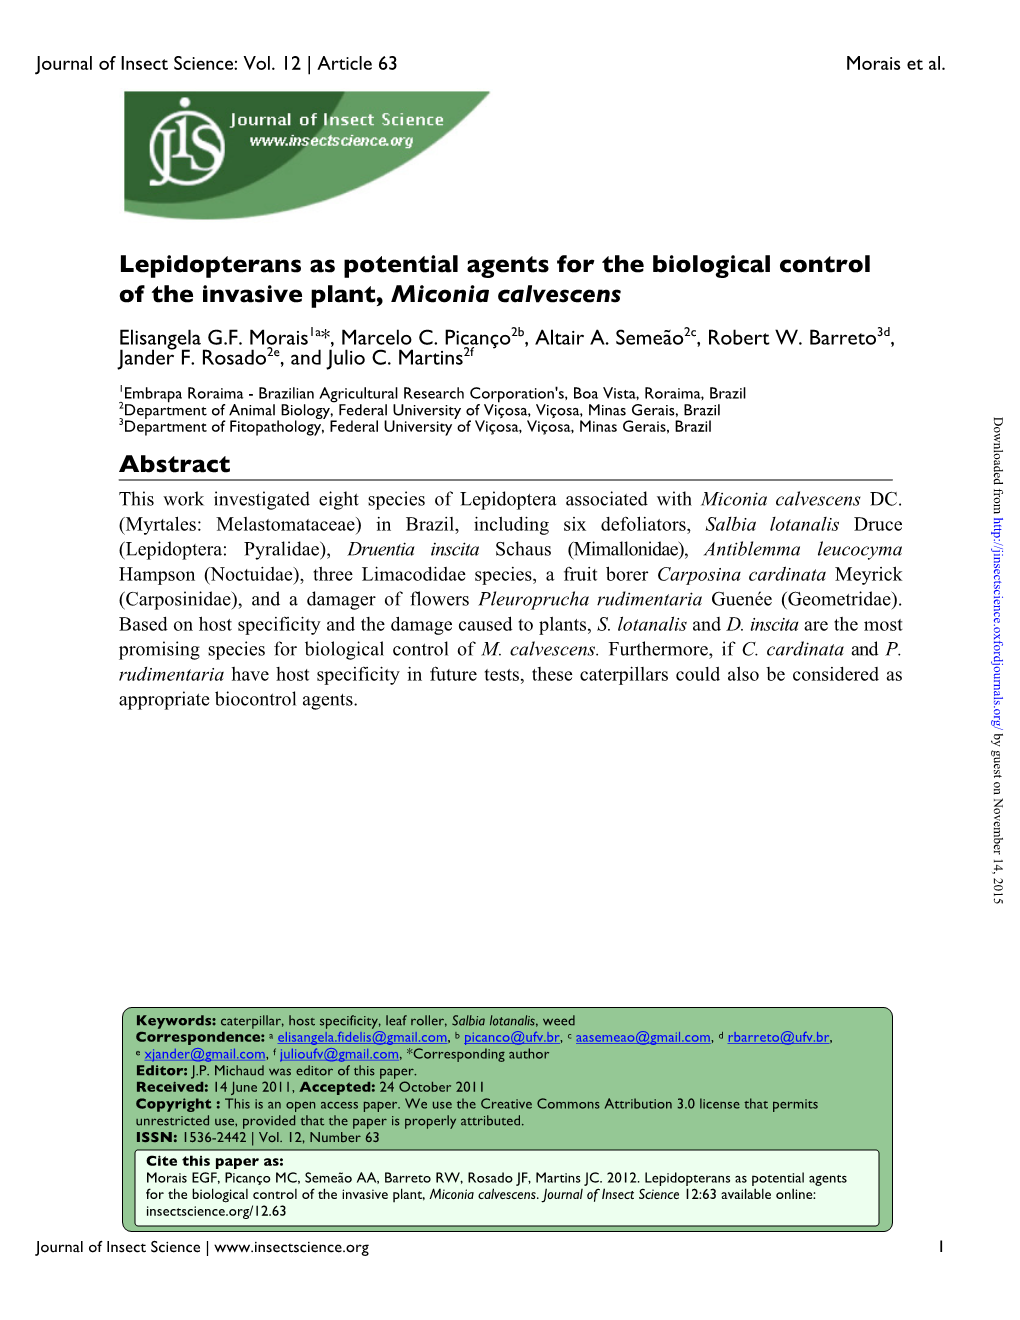 Lepidopterans As Potential Agents for the Biological Control of the Invasive Plant, Miconia Calvescens Abstract